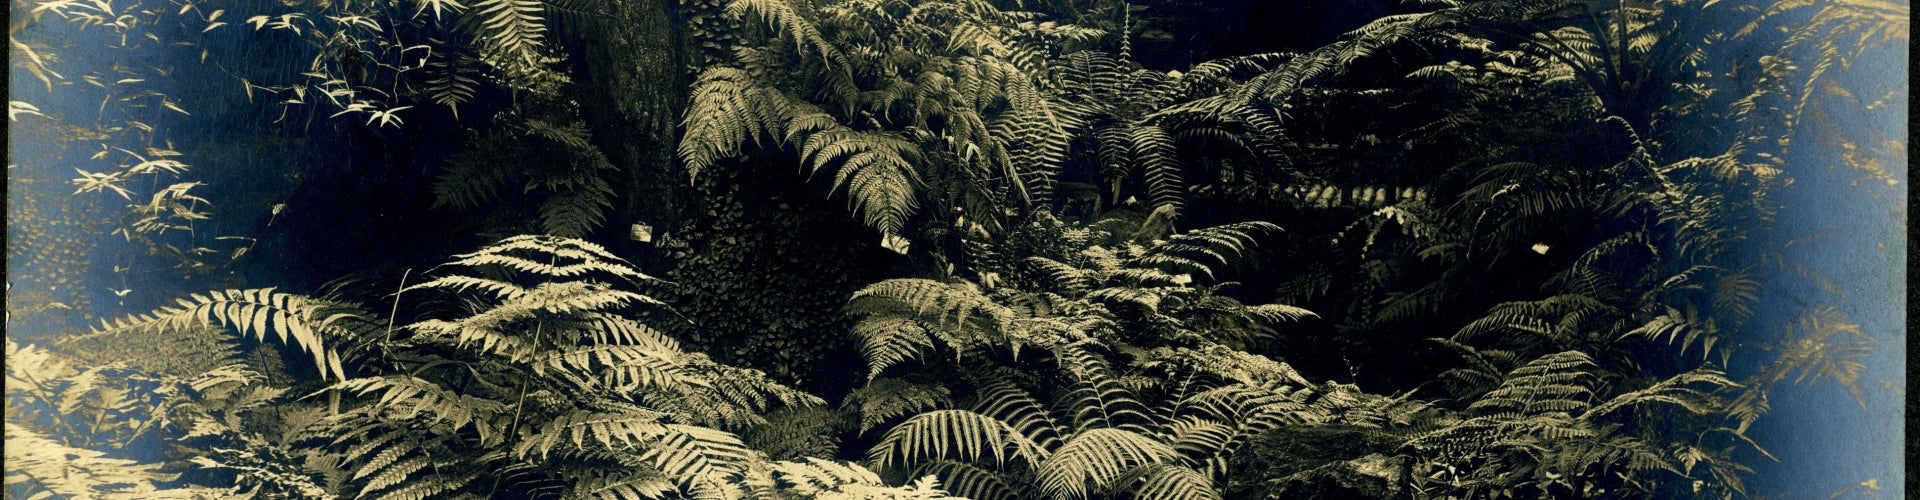 A black and white photograph of a closeup of ferns.